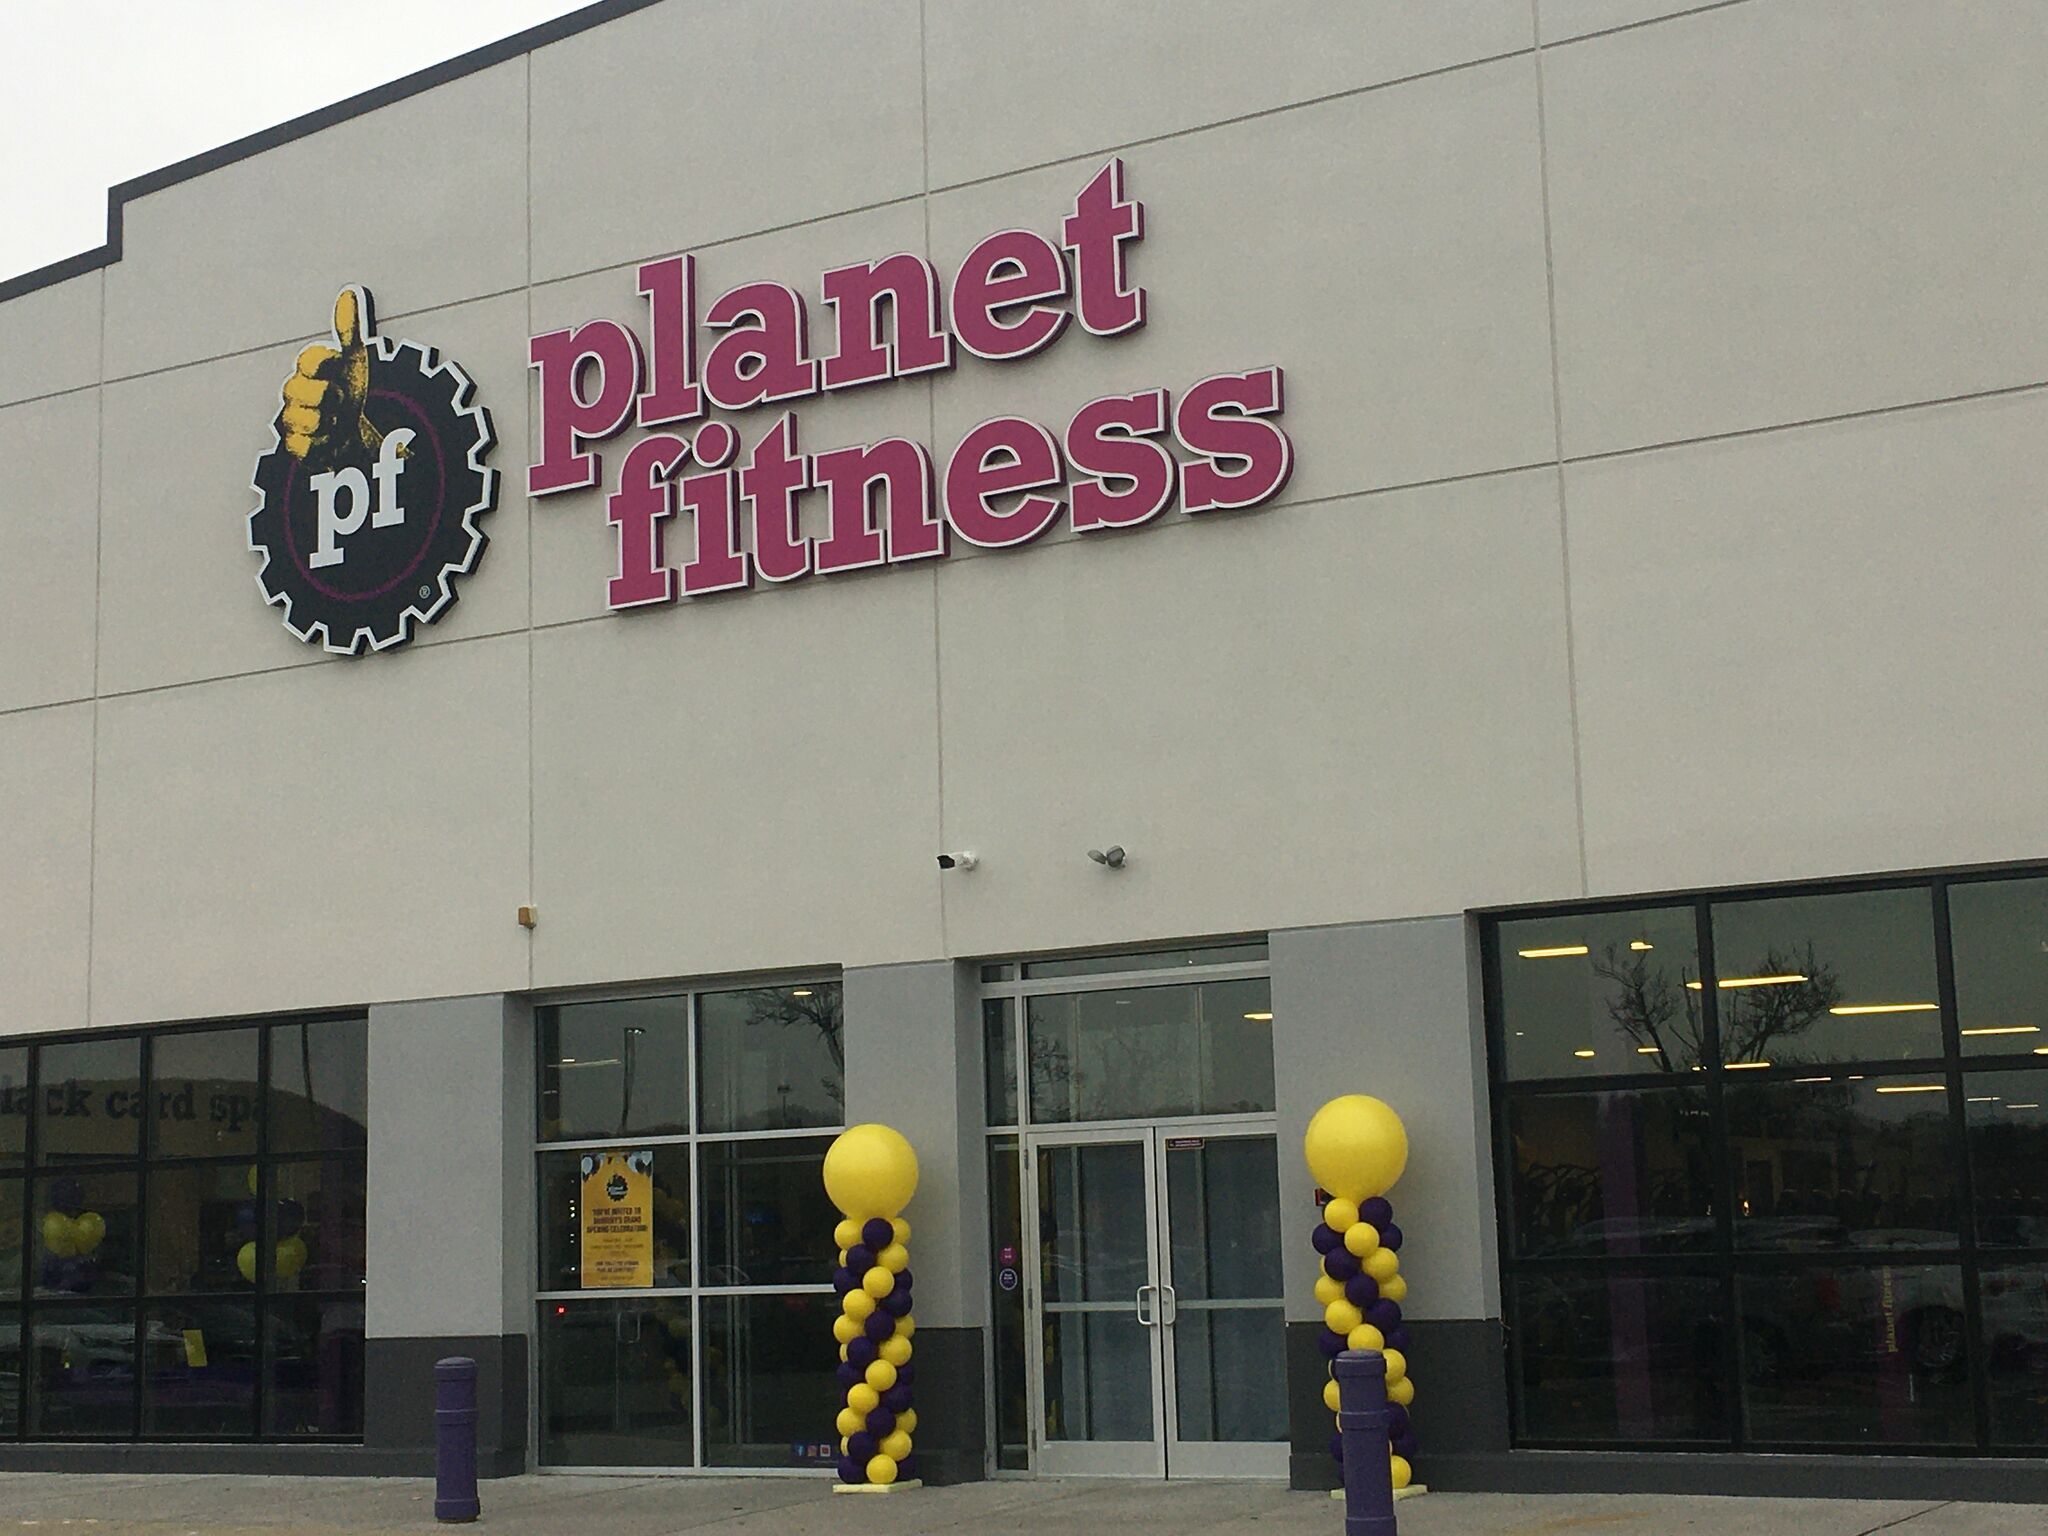 Second Planet Fitness in Danbury celebrates grand opening